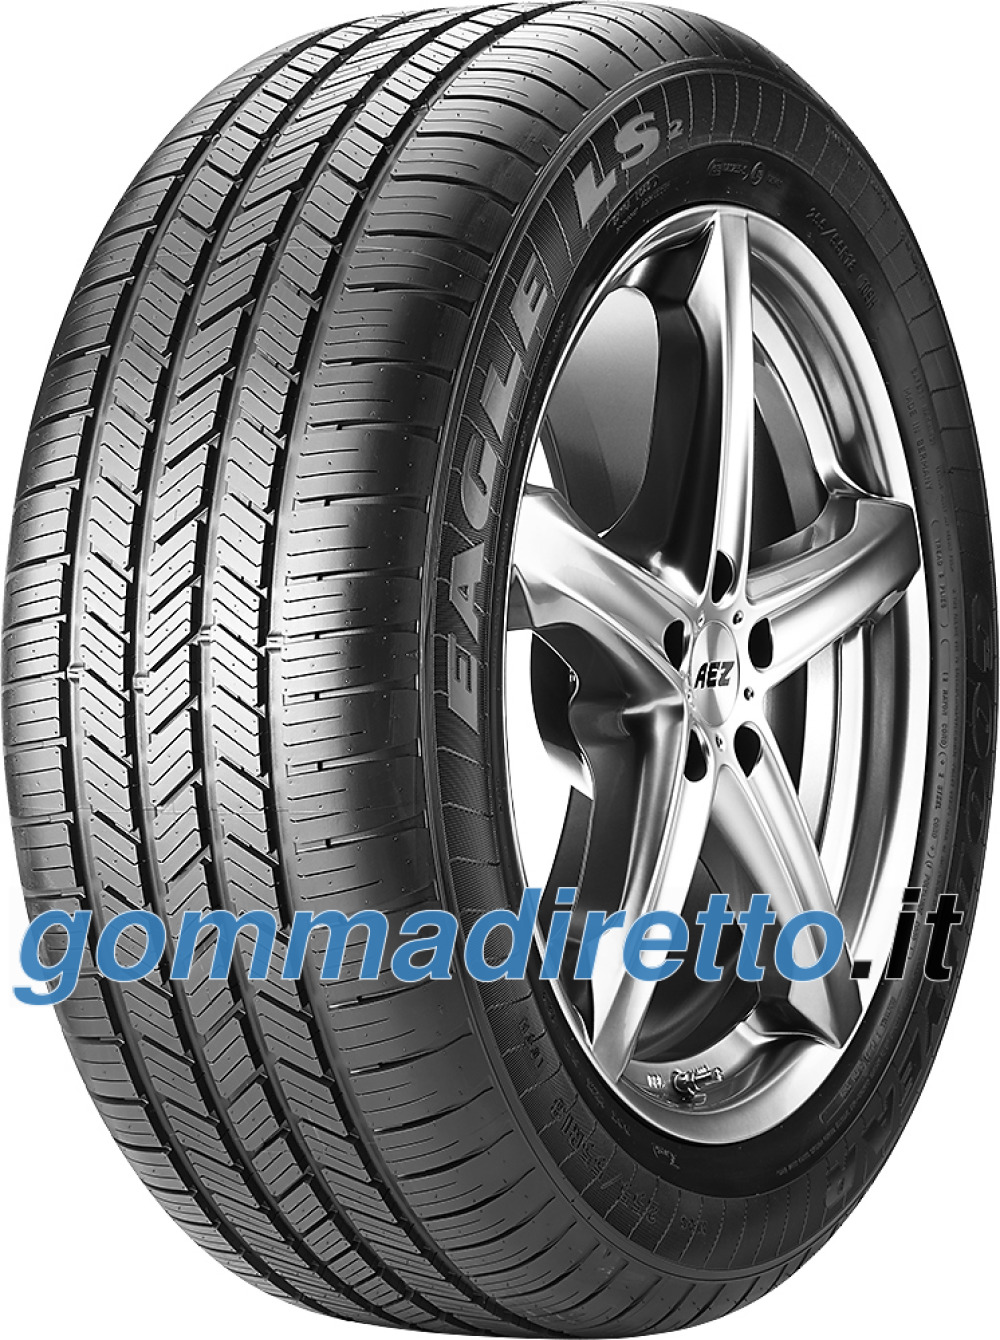 Image of Goodyear Eagle LS2 ( P225/55 R18 97H )